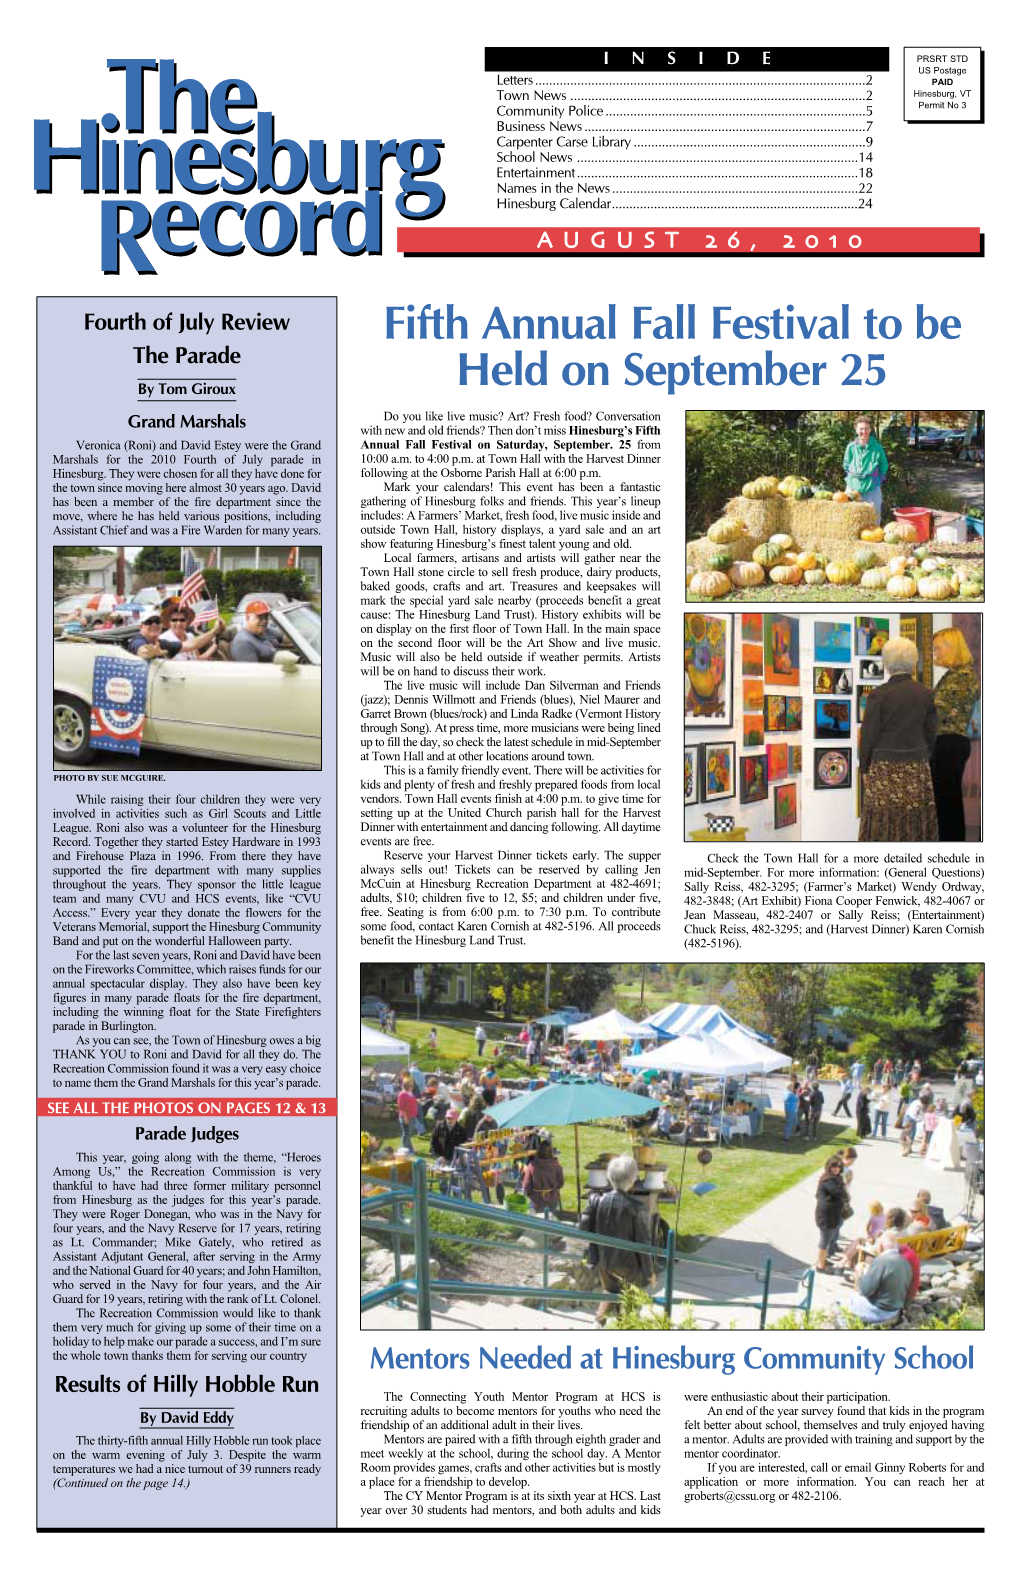 Fifth Annual Fall Festival to Be Held on September 25